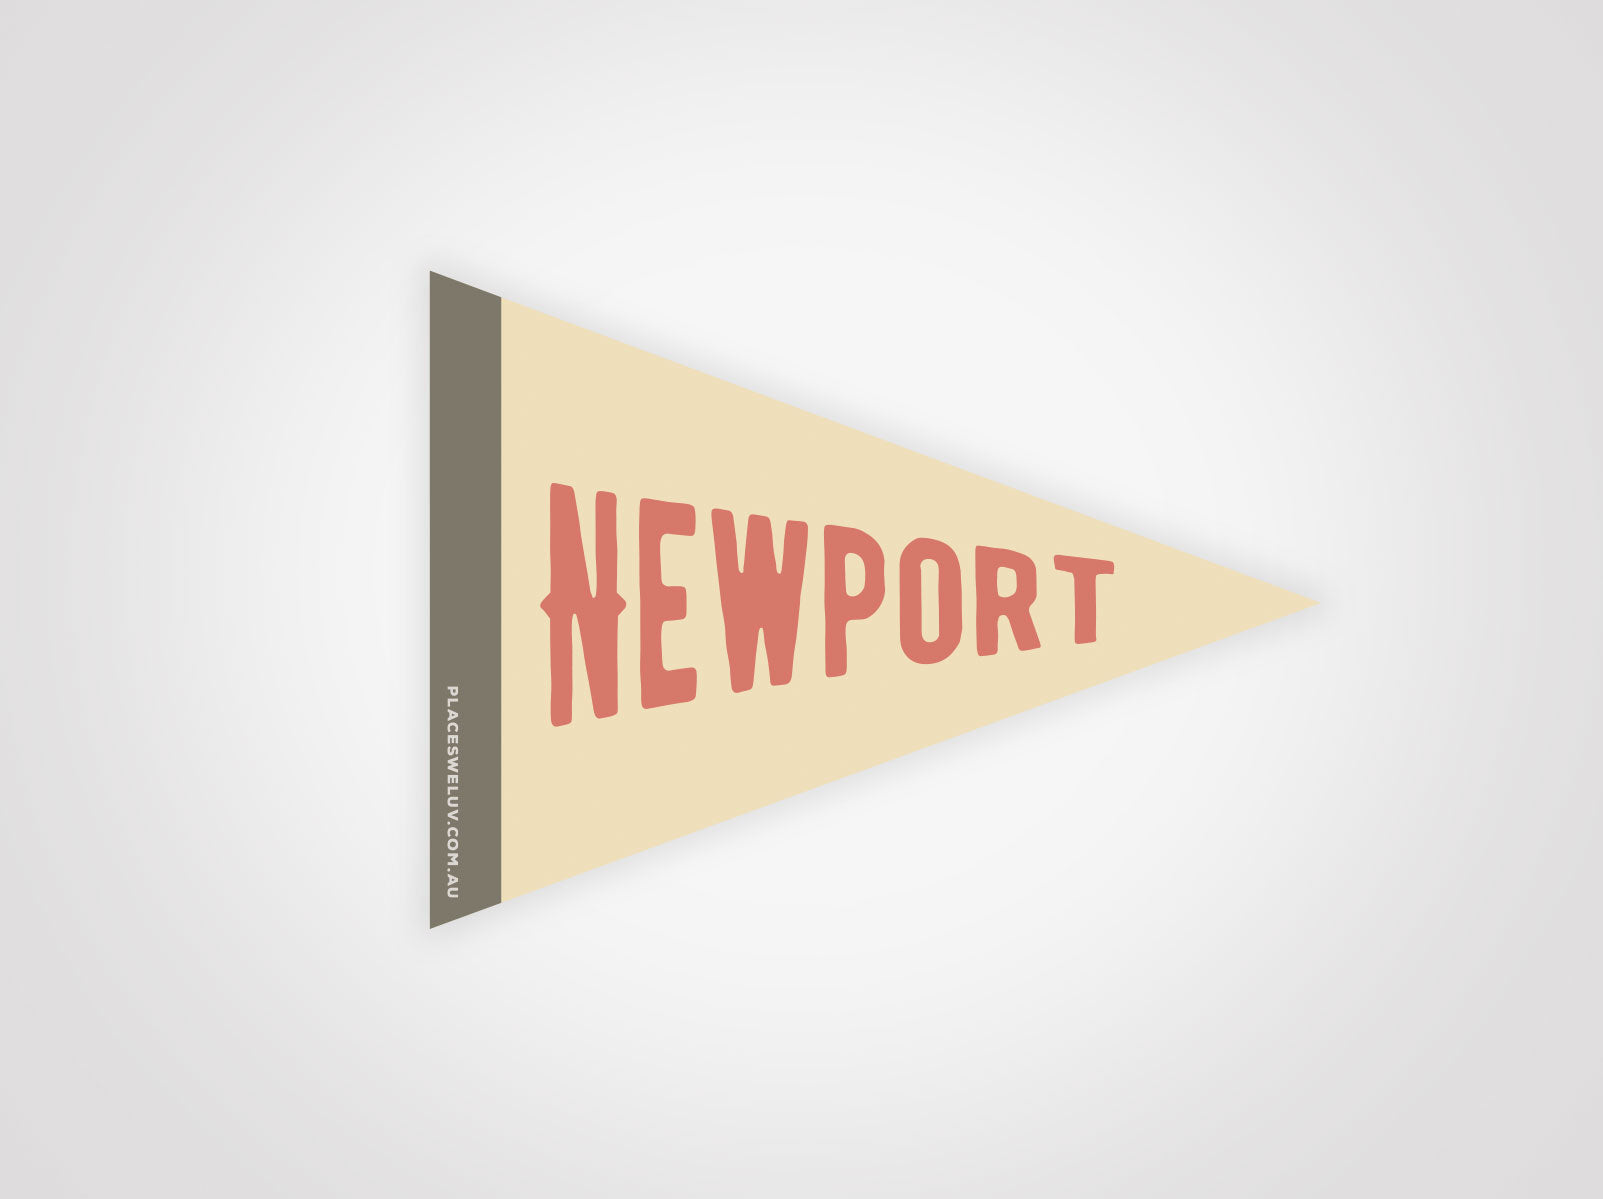 Newport beach vintage travel style flag decals by places we luv